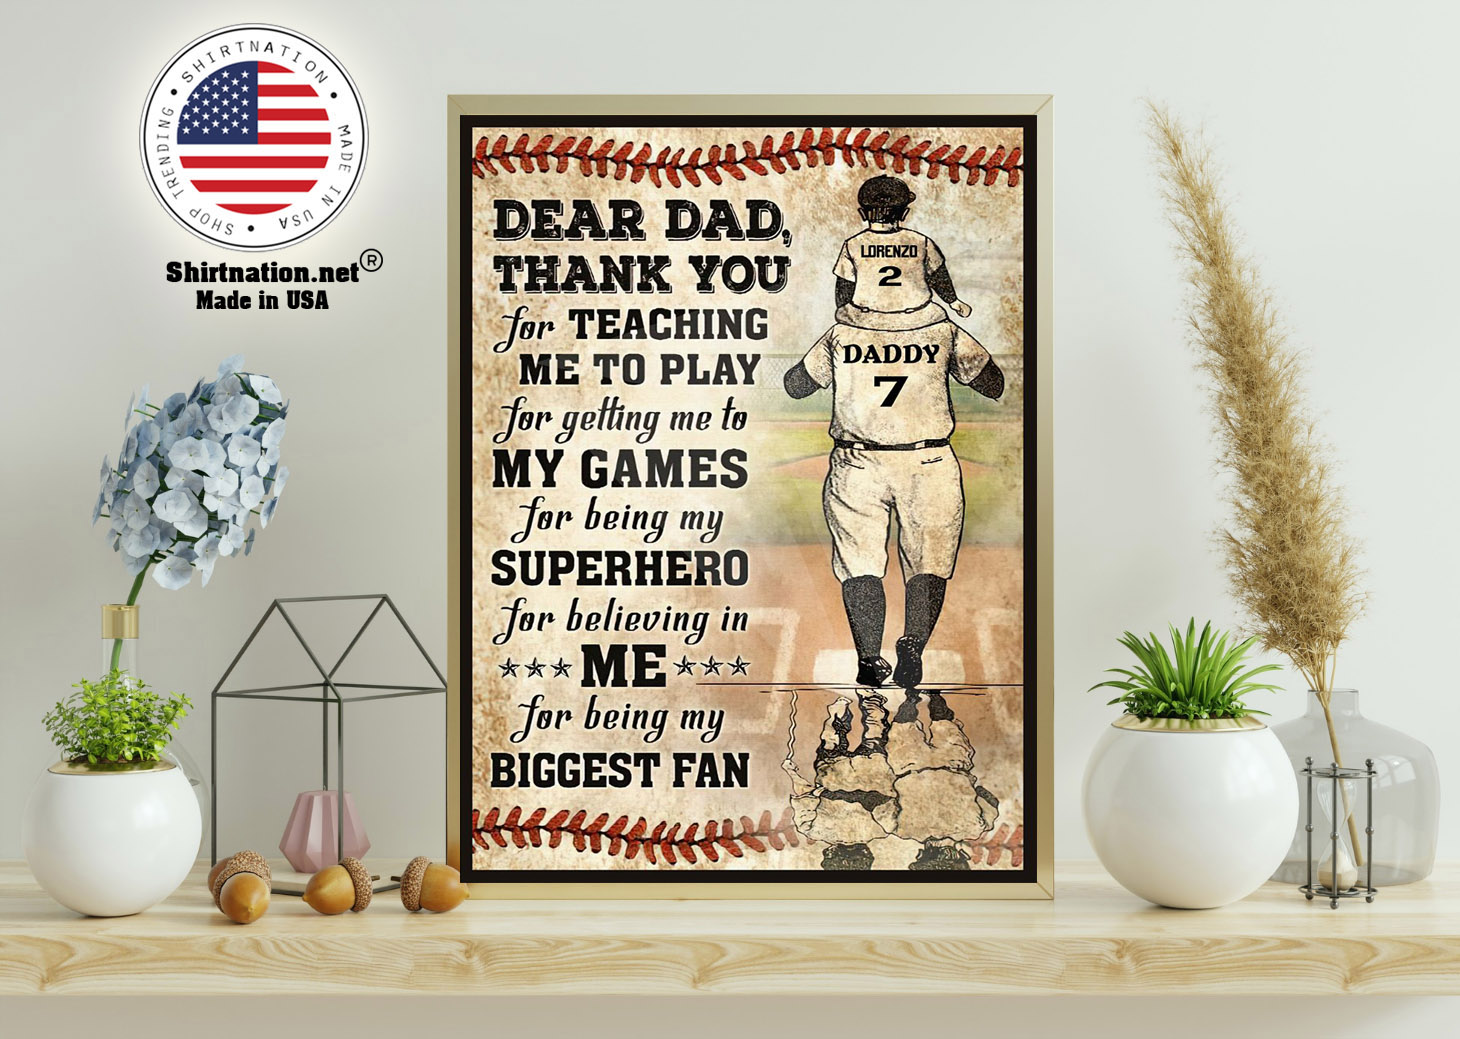 Baseball Dear dad thank you for teaching me to play for getting me to my games custom poster 11